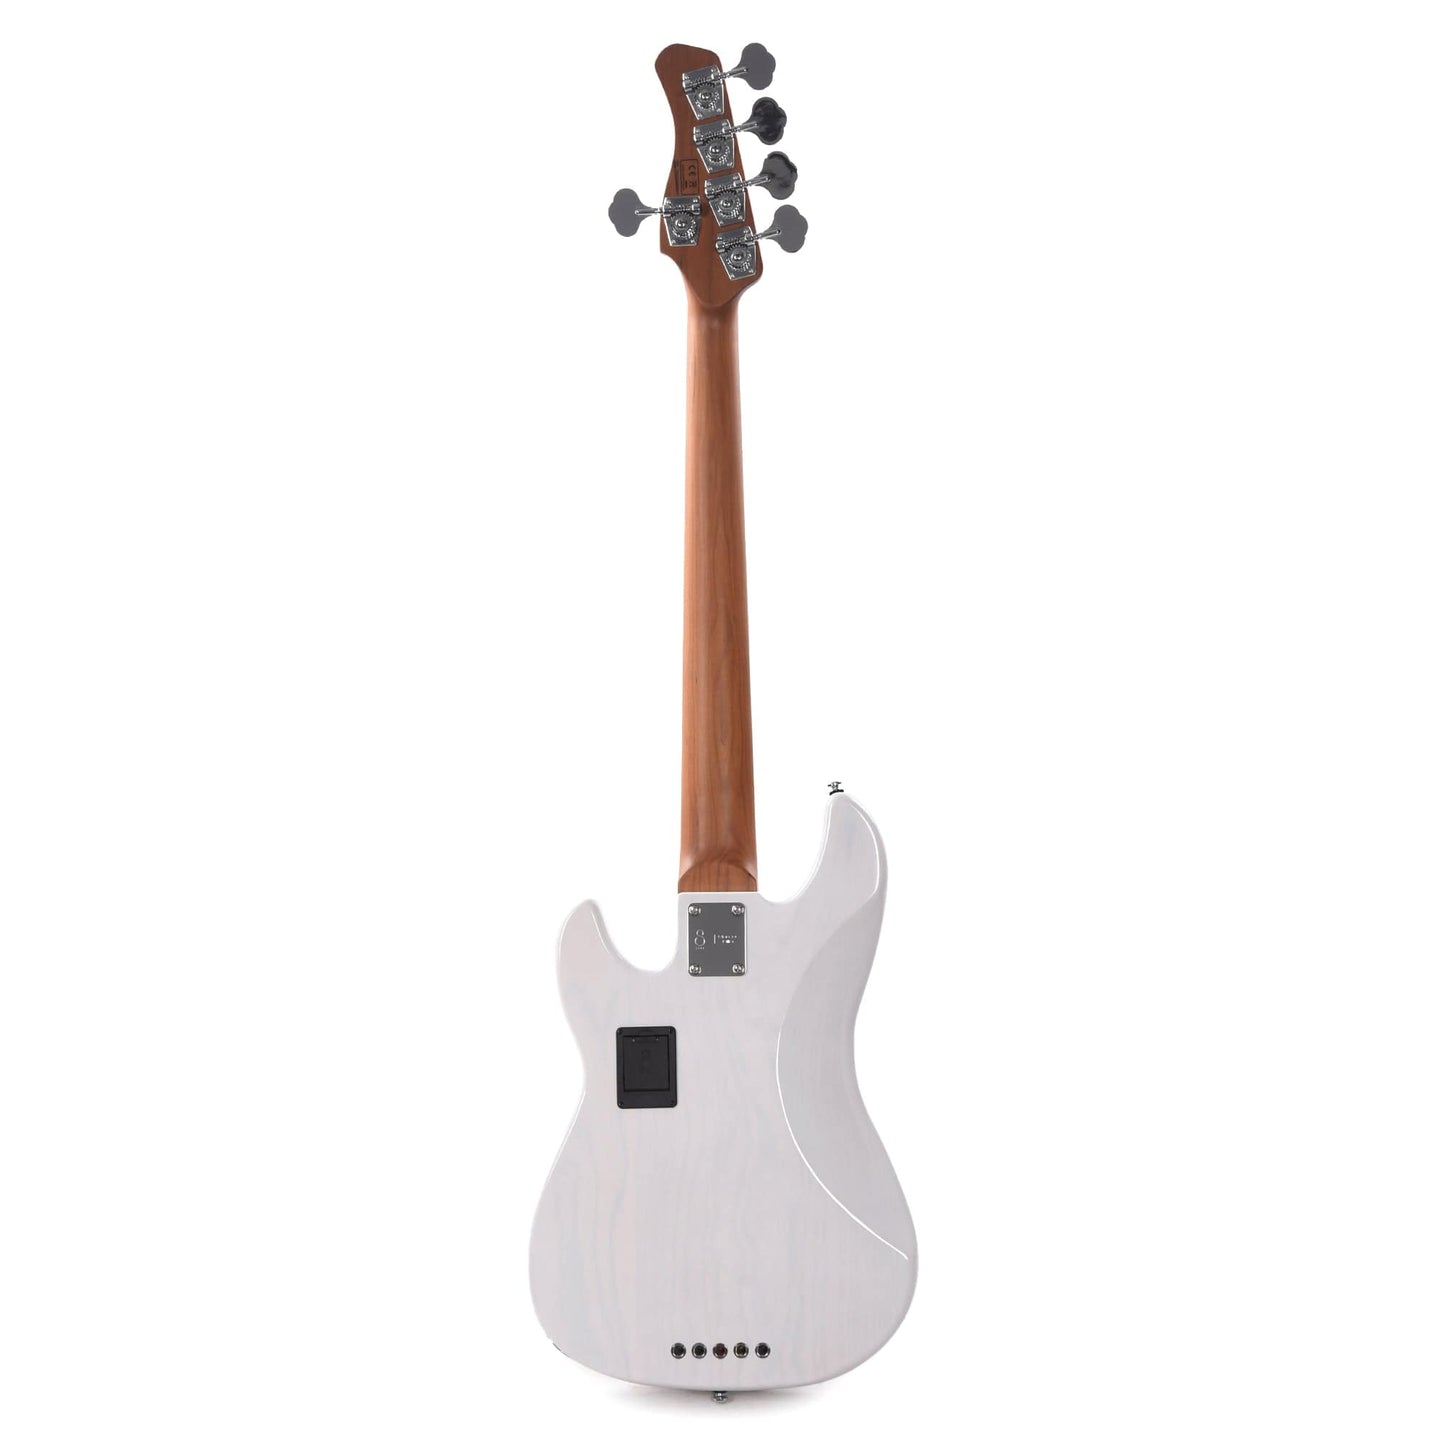 Sire Marcus Miller P8 Swamp Ash 5-String White Blonde Bass Guitars / 5-String or More